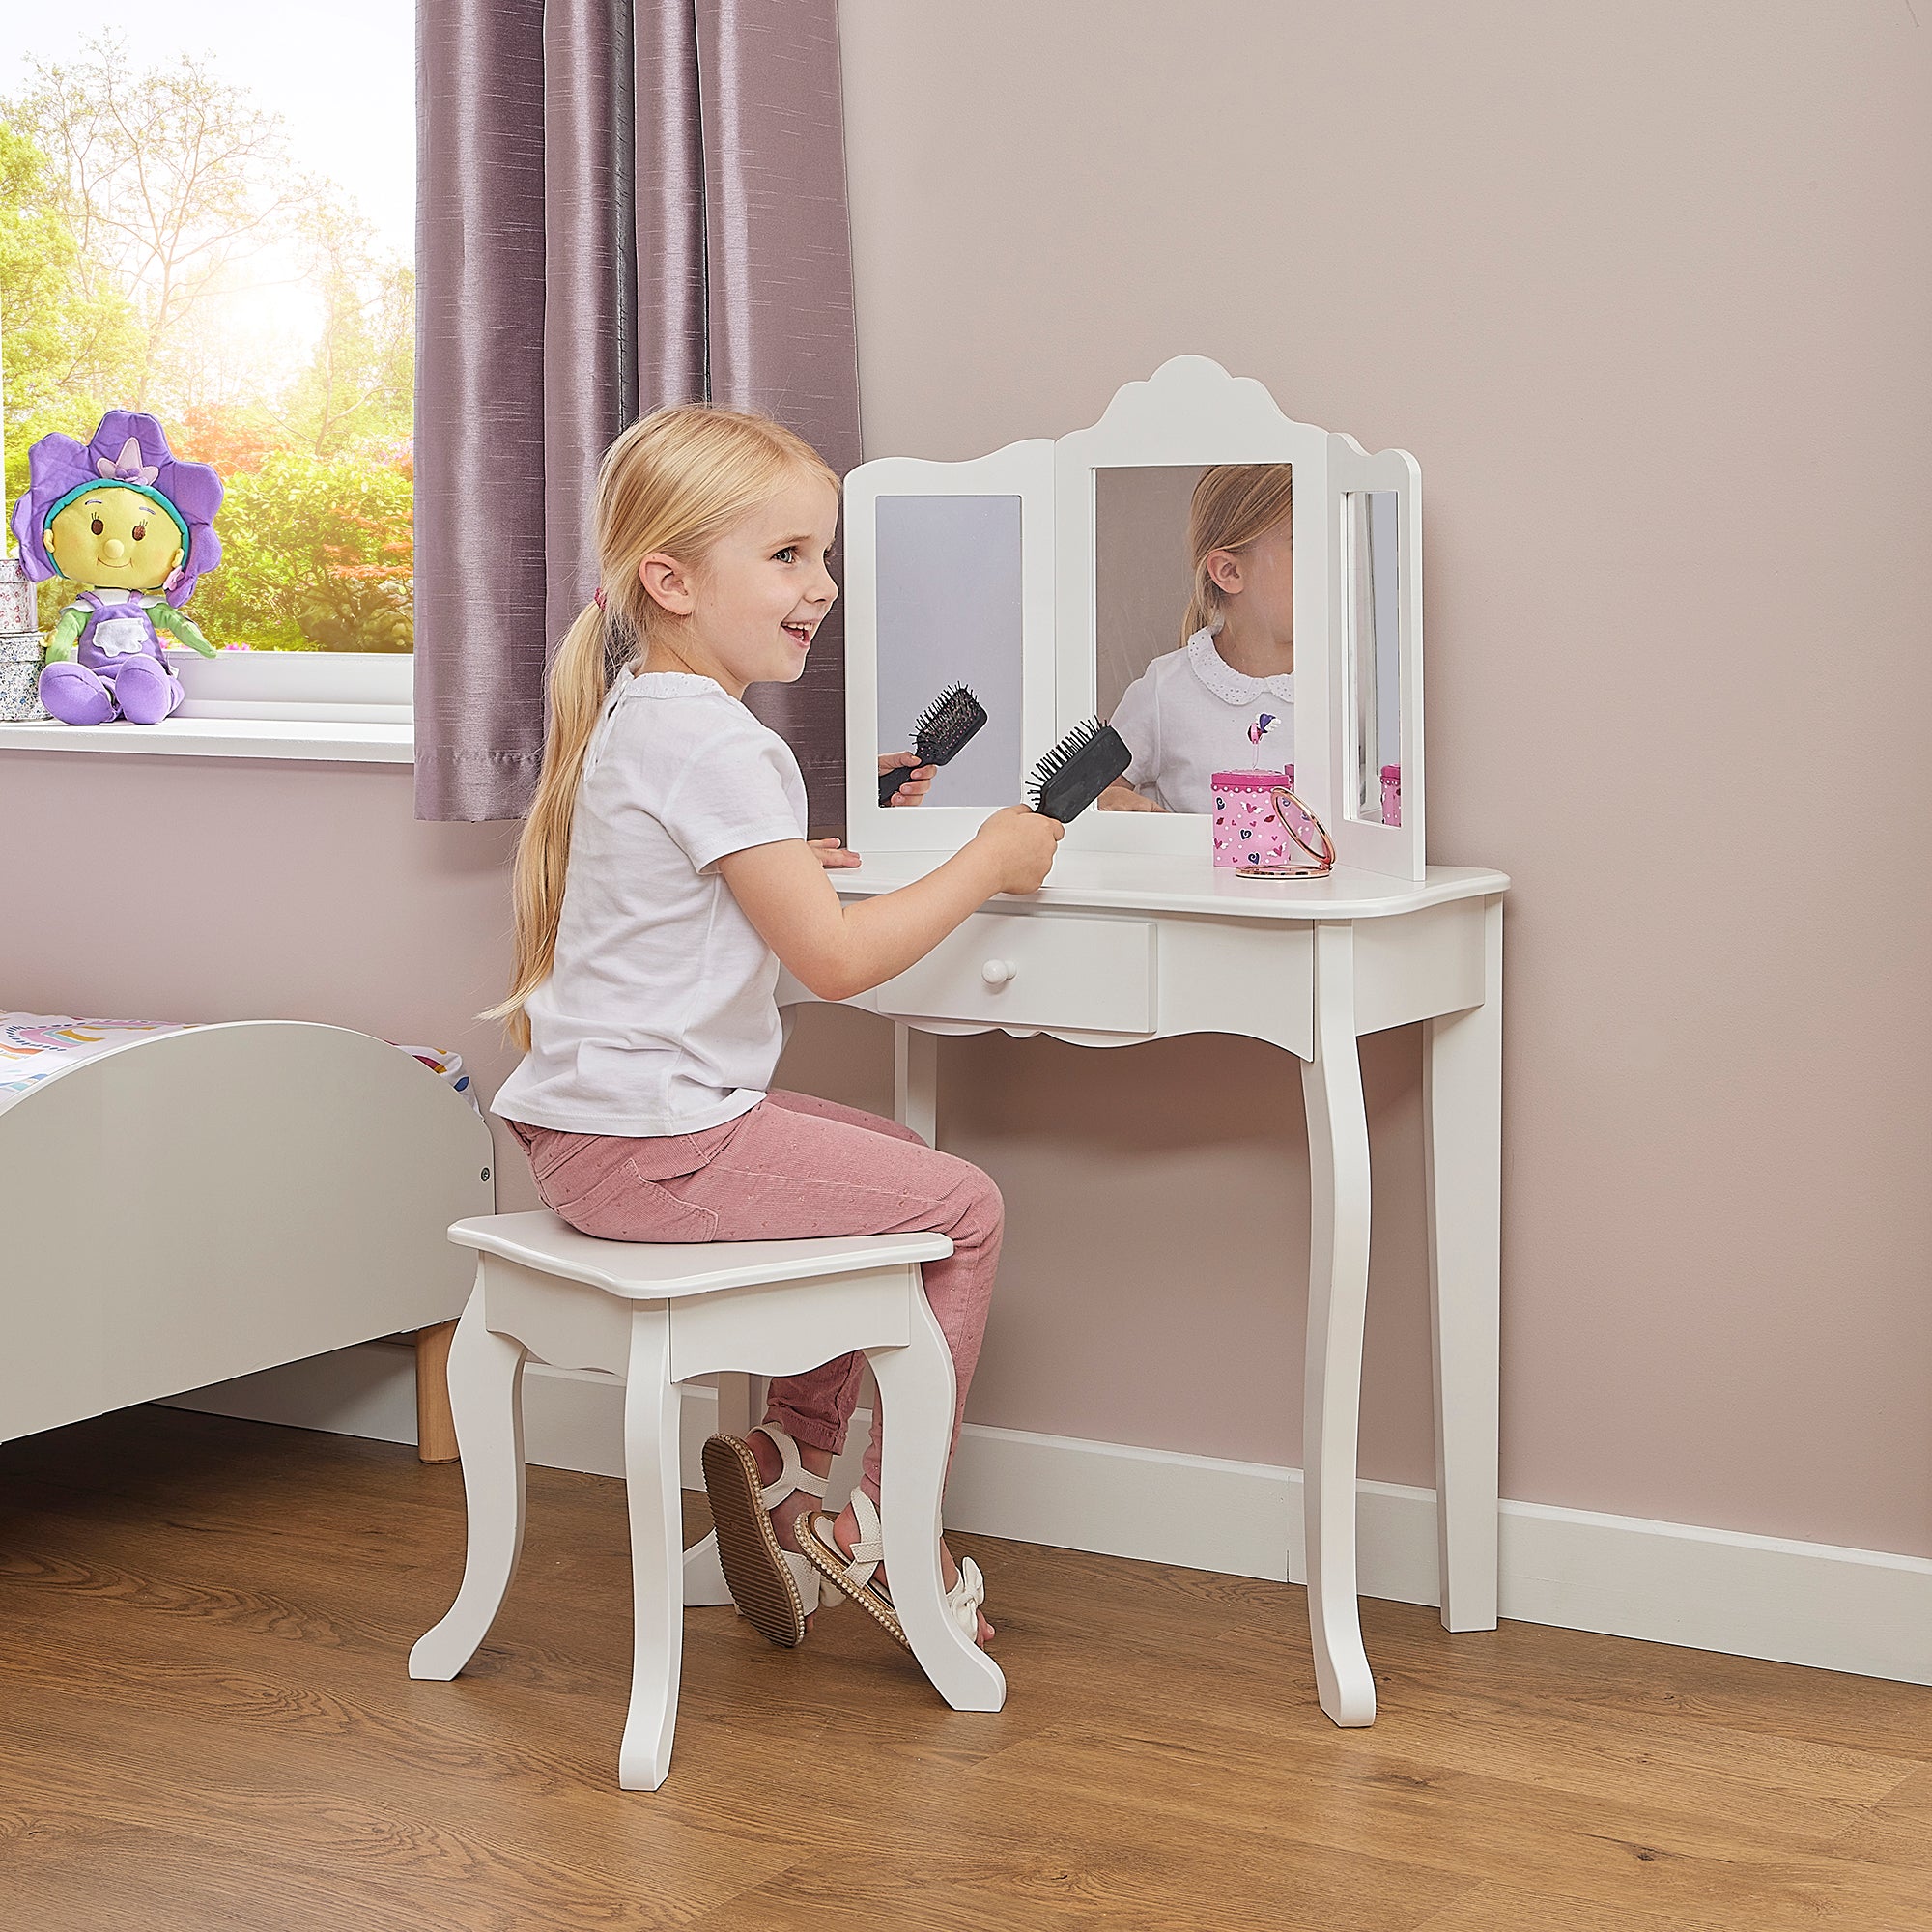 Bophy Girls' Vanity Table and Chair Set, Kids India | Ubuy